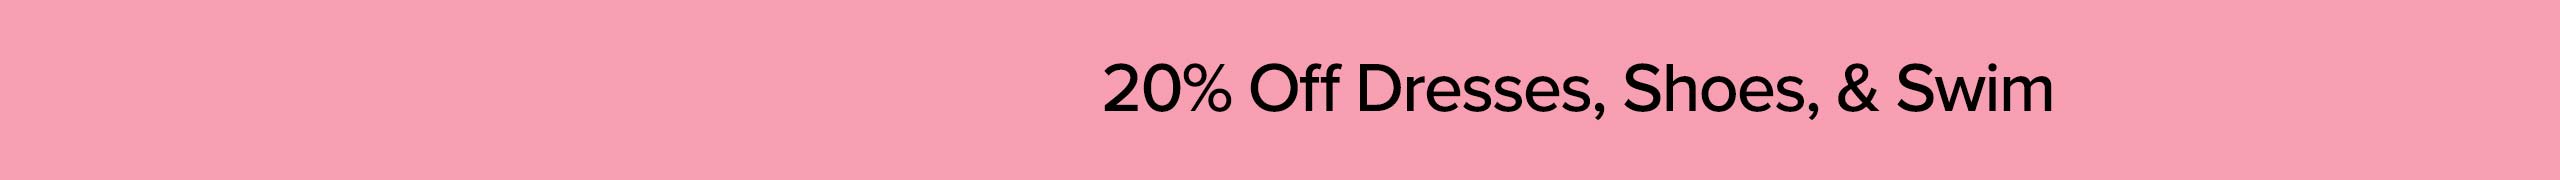 20% Off Dresses, Shoes, and Swim